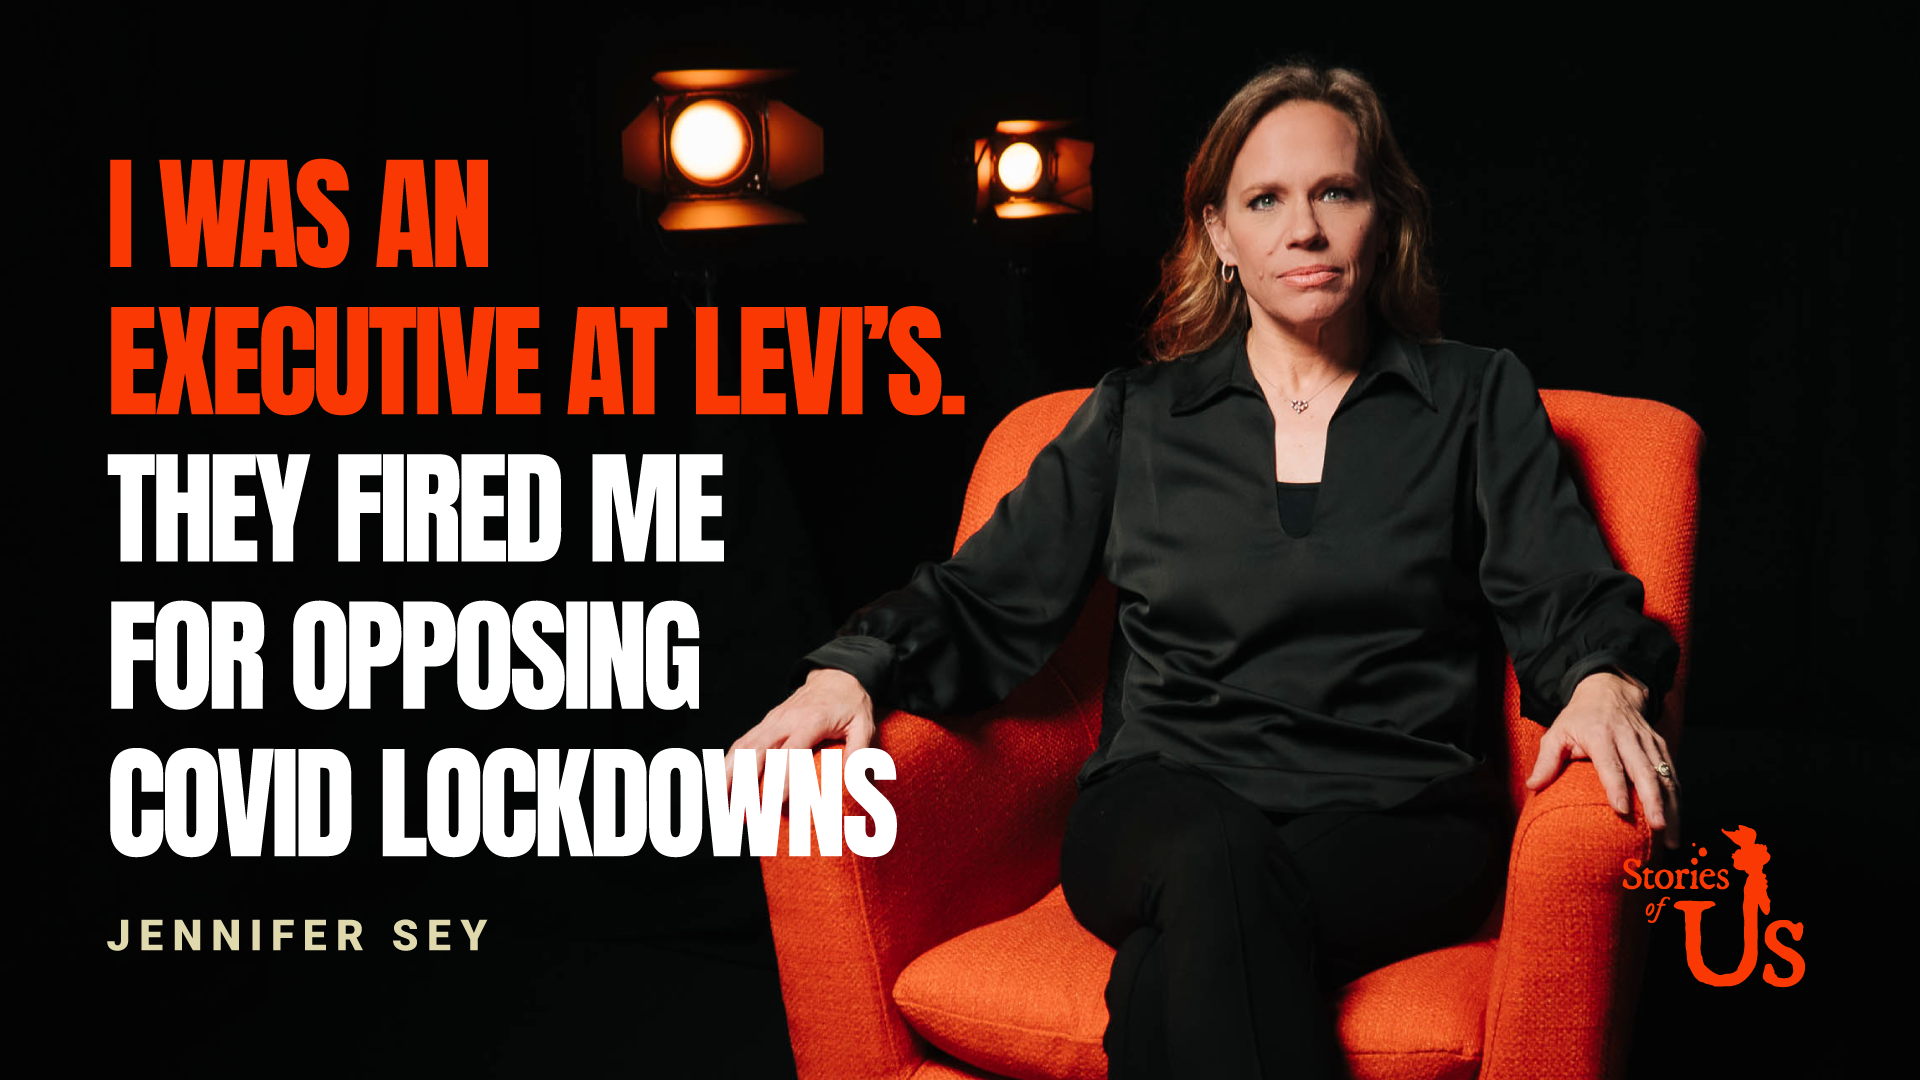 Jennifer Sey: I Was an Executive at Levi's. They Fired Me for Opposing COVID Lockdowns.